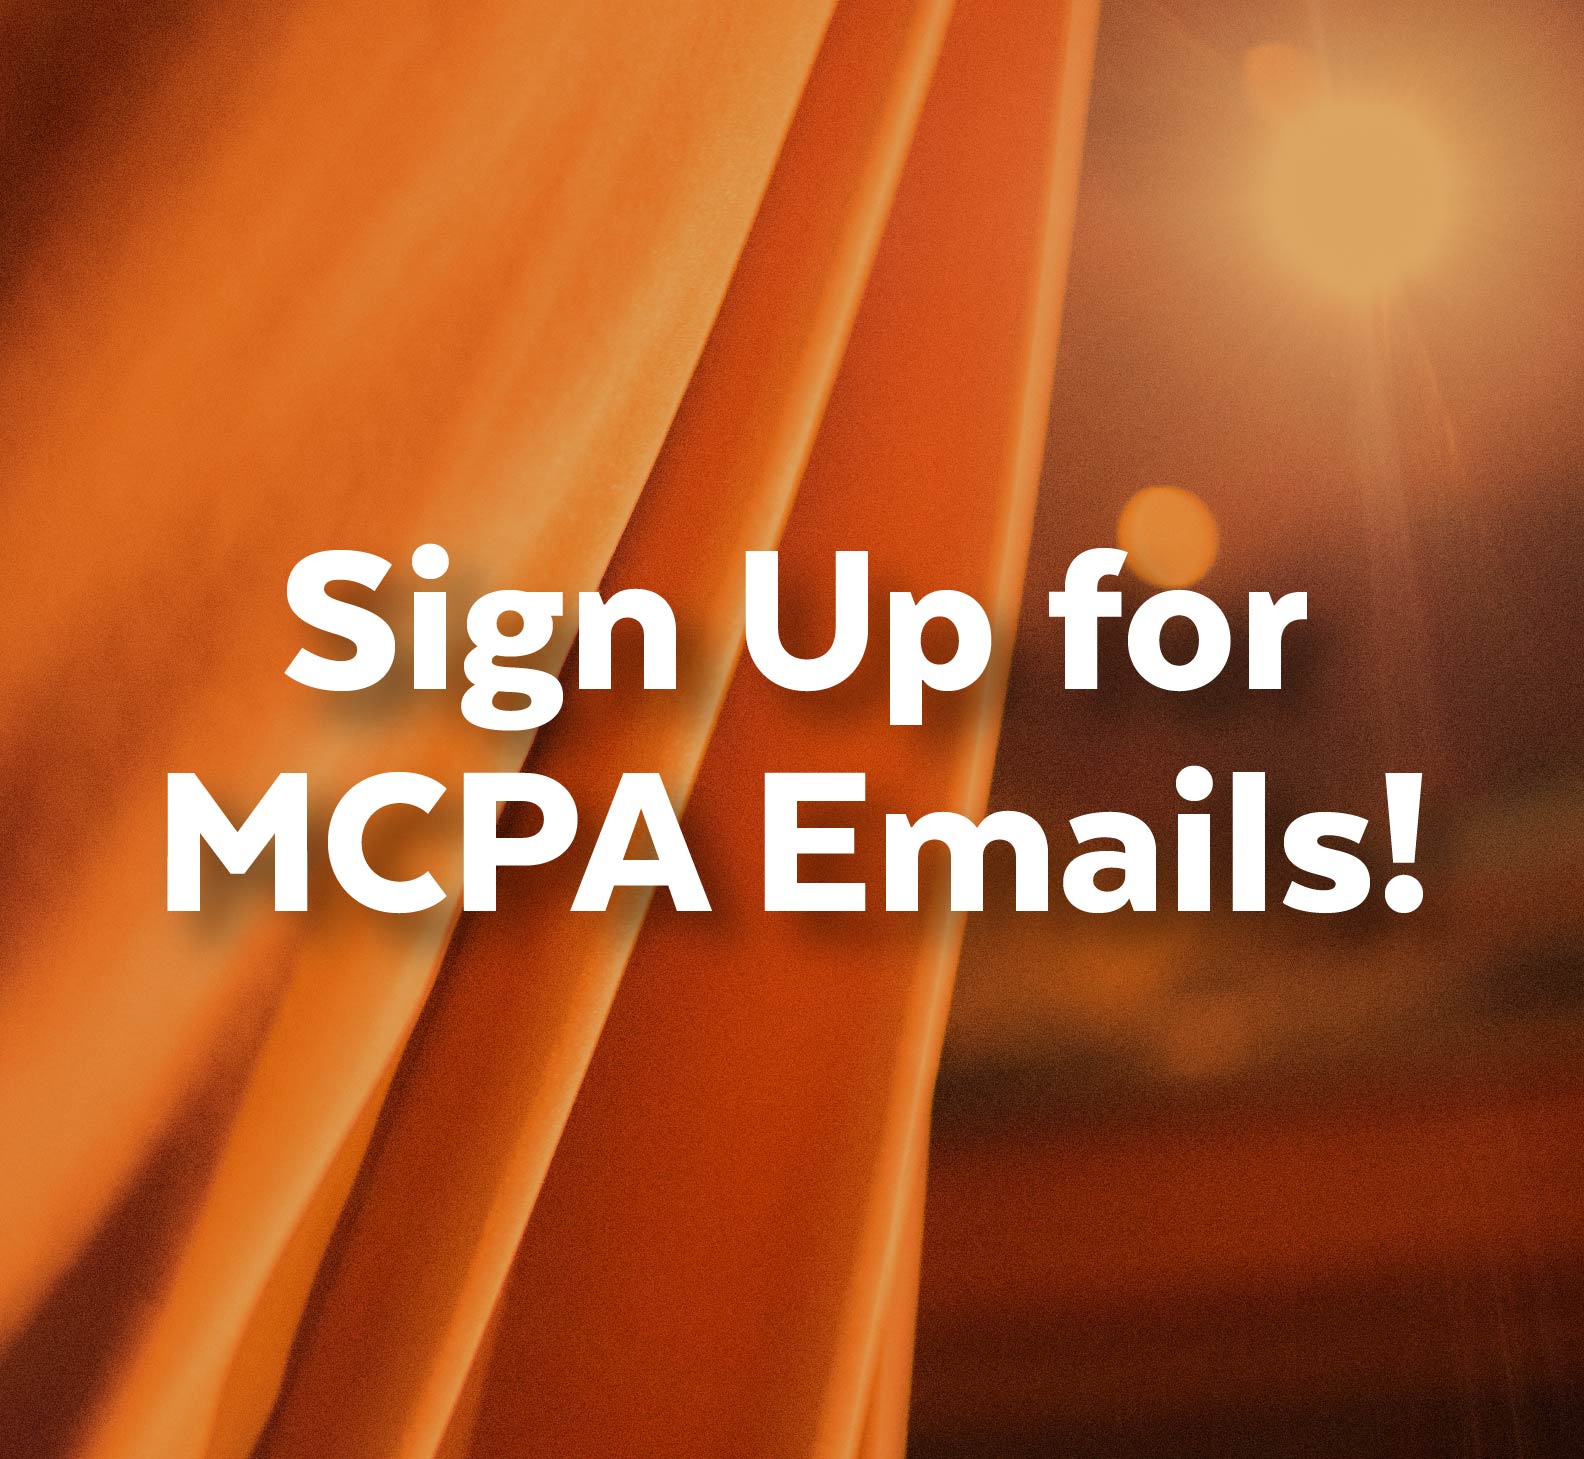 Sign Up for MCPA Emails